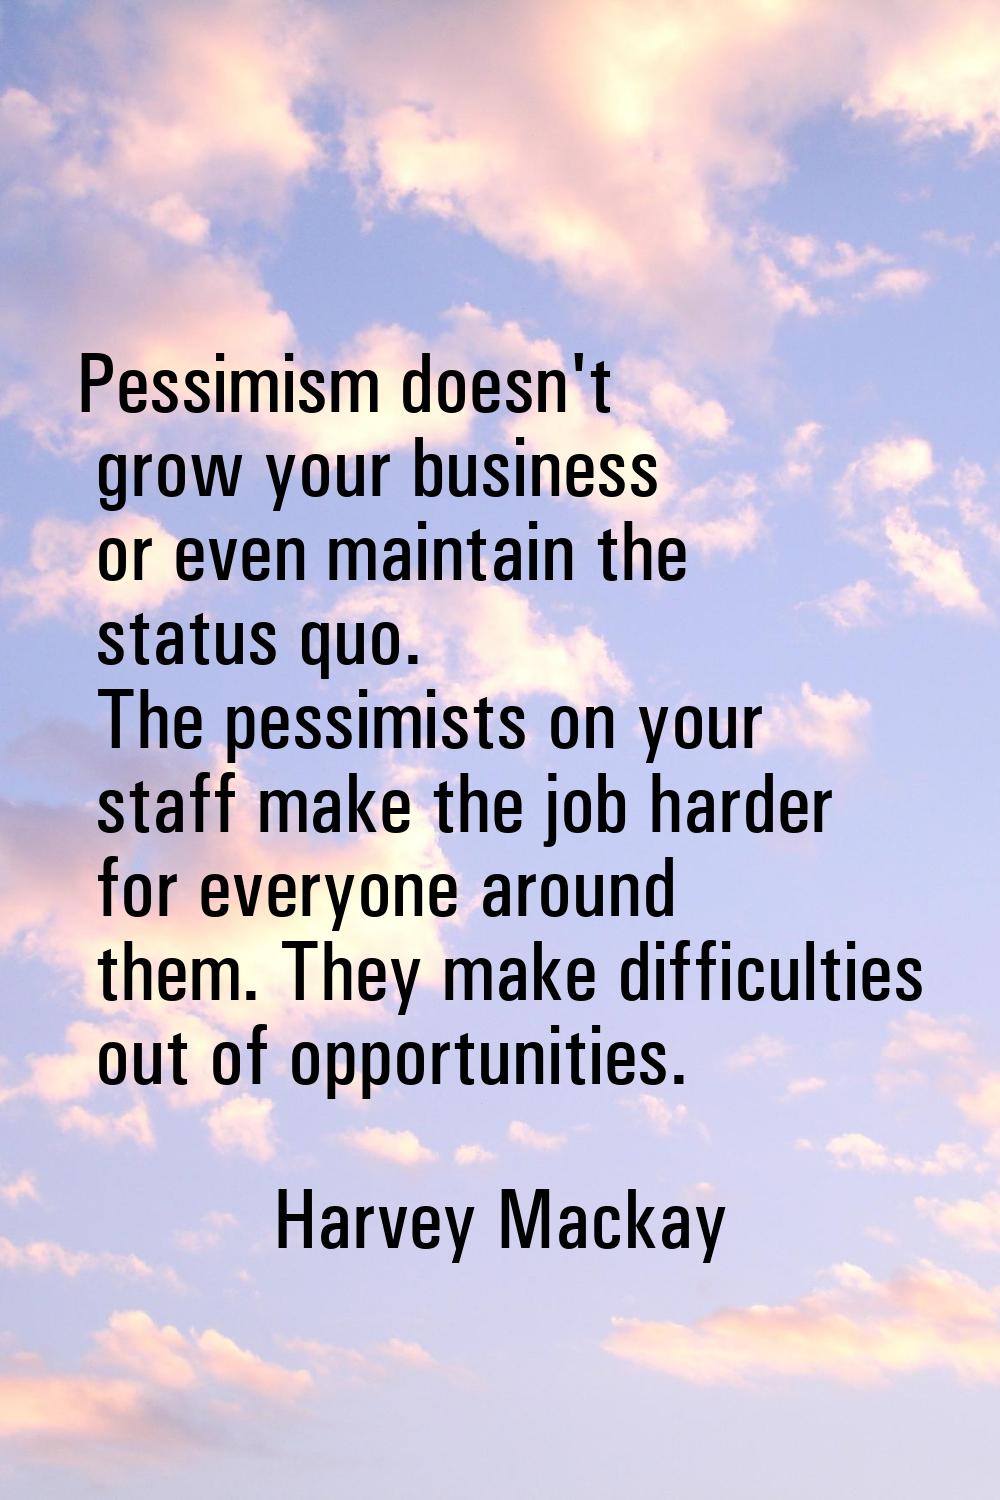 Pessimism doesn't grow your business or even maintain the status quo. The pessimists on your staff 